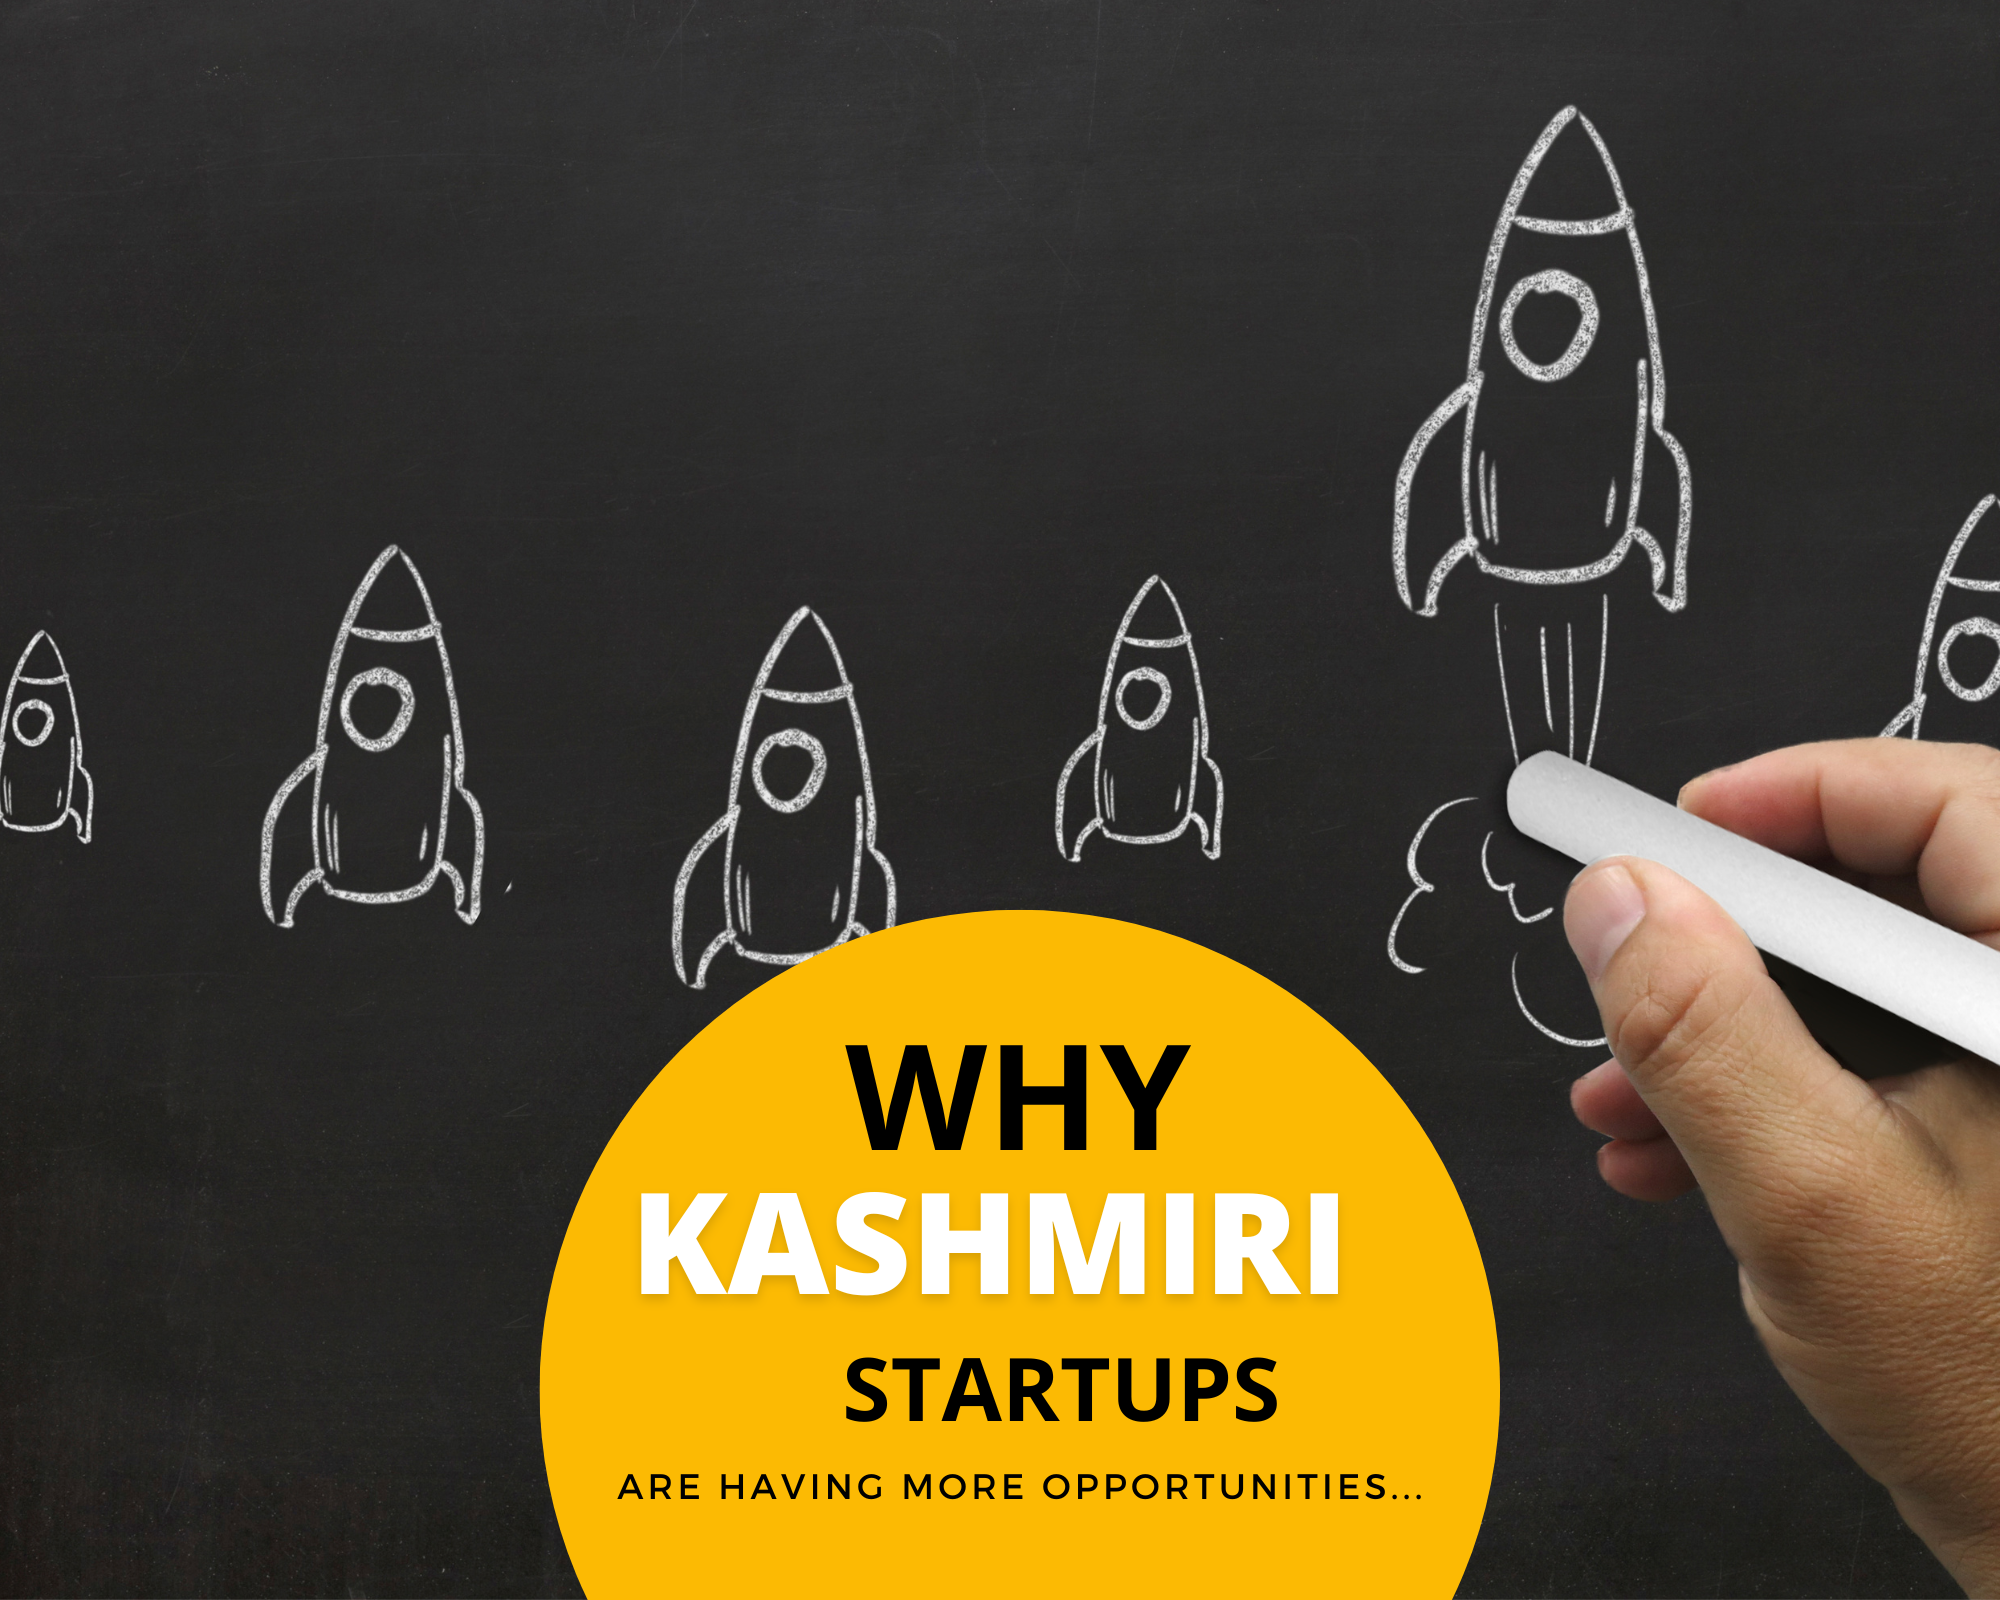 Why Kashmiri Startups are having more opportunities